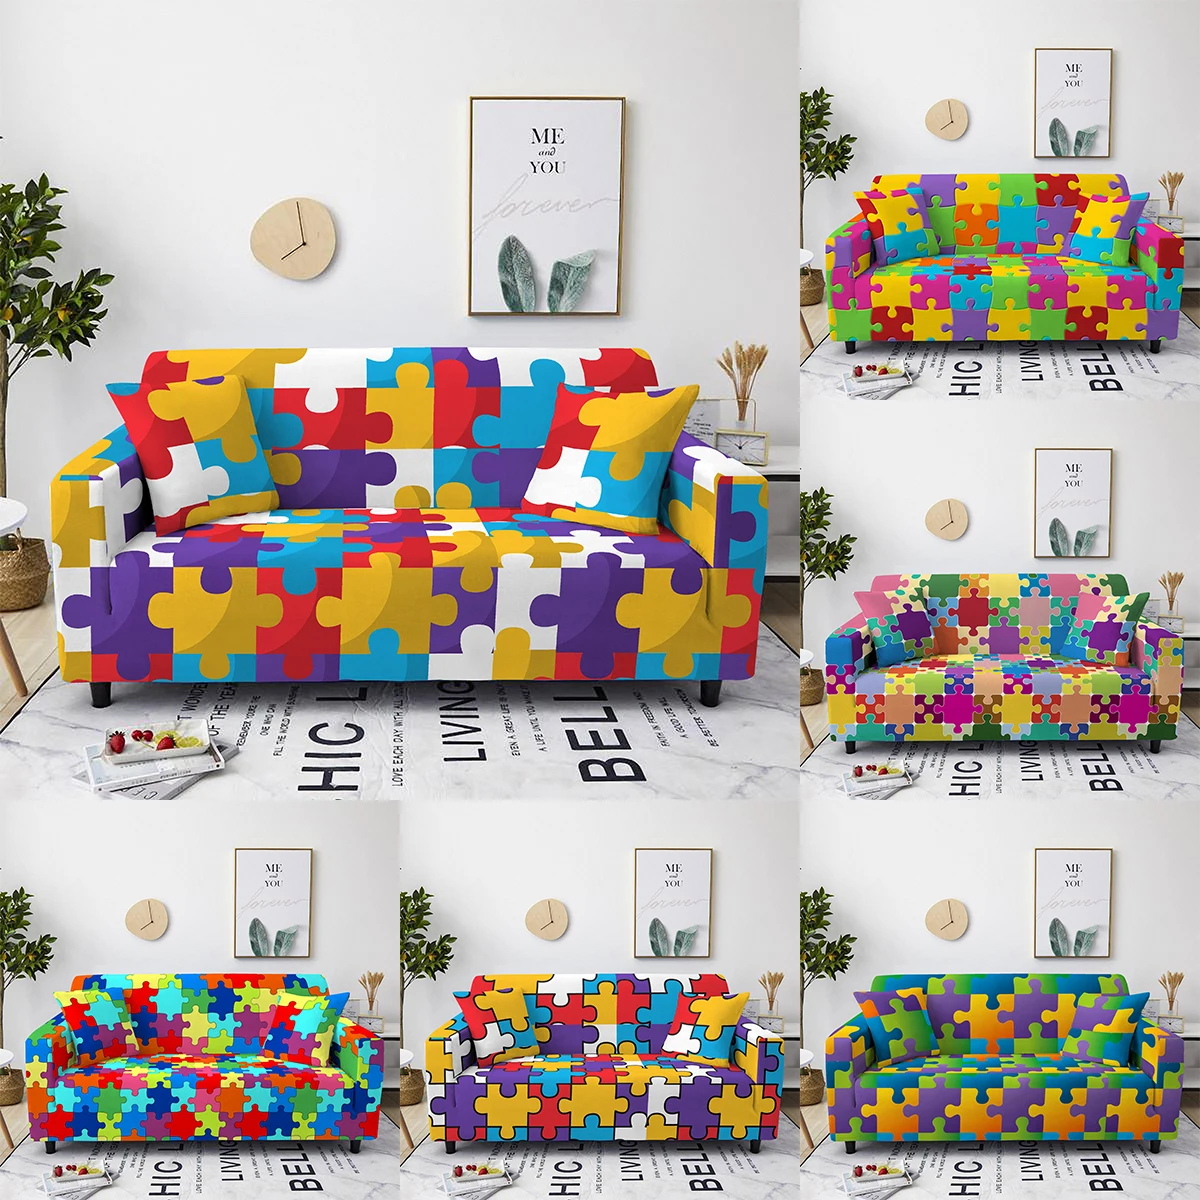 

Colorful Block Elastic Slipcovers Universal Toy Splicing Sofa Cover Stretch Sectional Couch Covers For Living Room 1/2/3/4 Seats